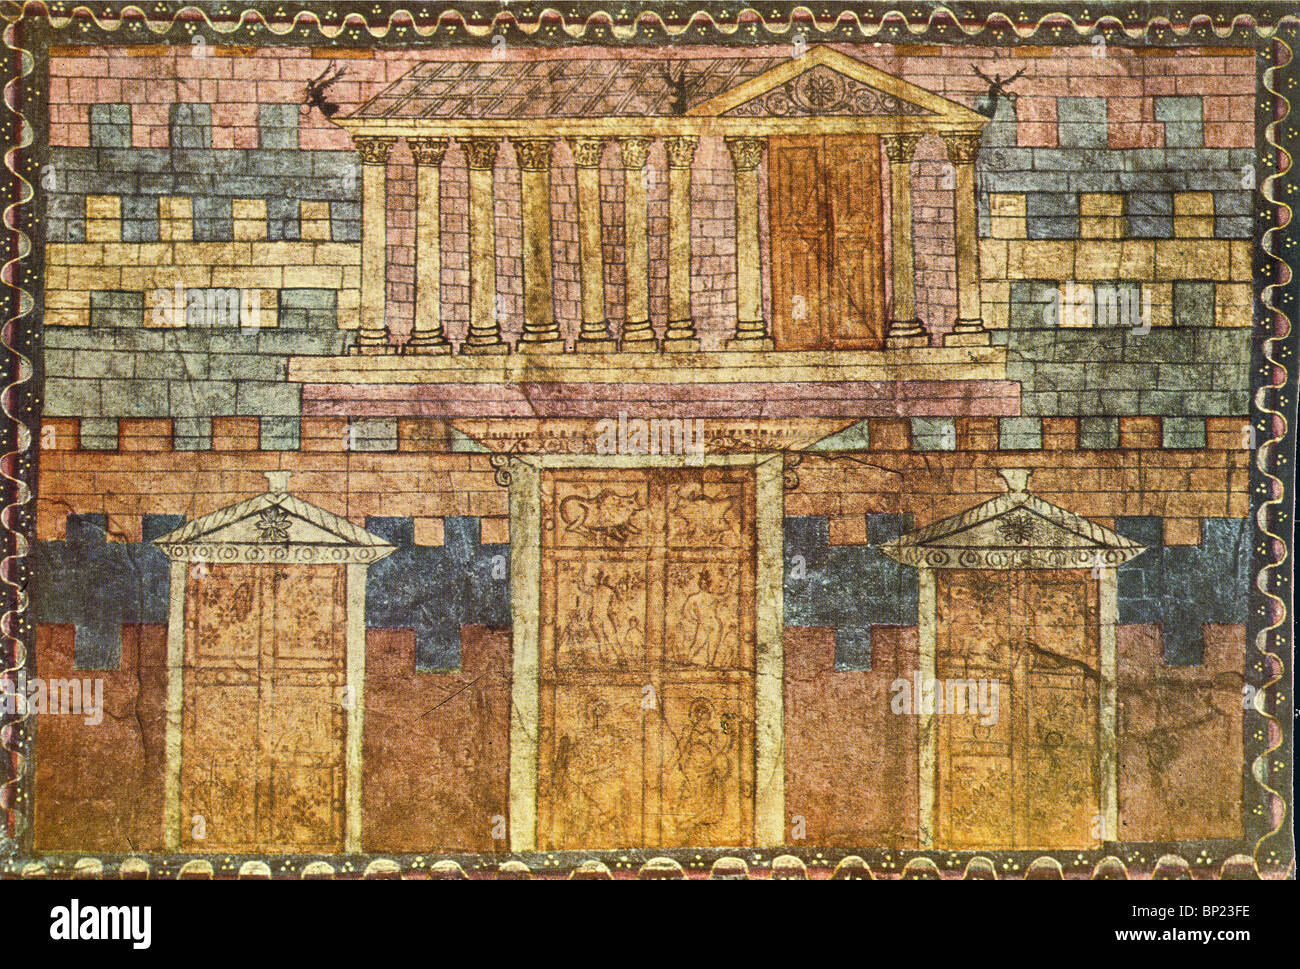 193. THE TEMPLE OF SOLOMON. WALL PAINTING FROM THE DURA EUROPOS, A 3RD. C. SYNAGOGUE IN TODAY'S IRAQ Stock Photo